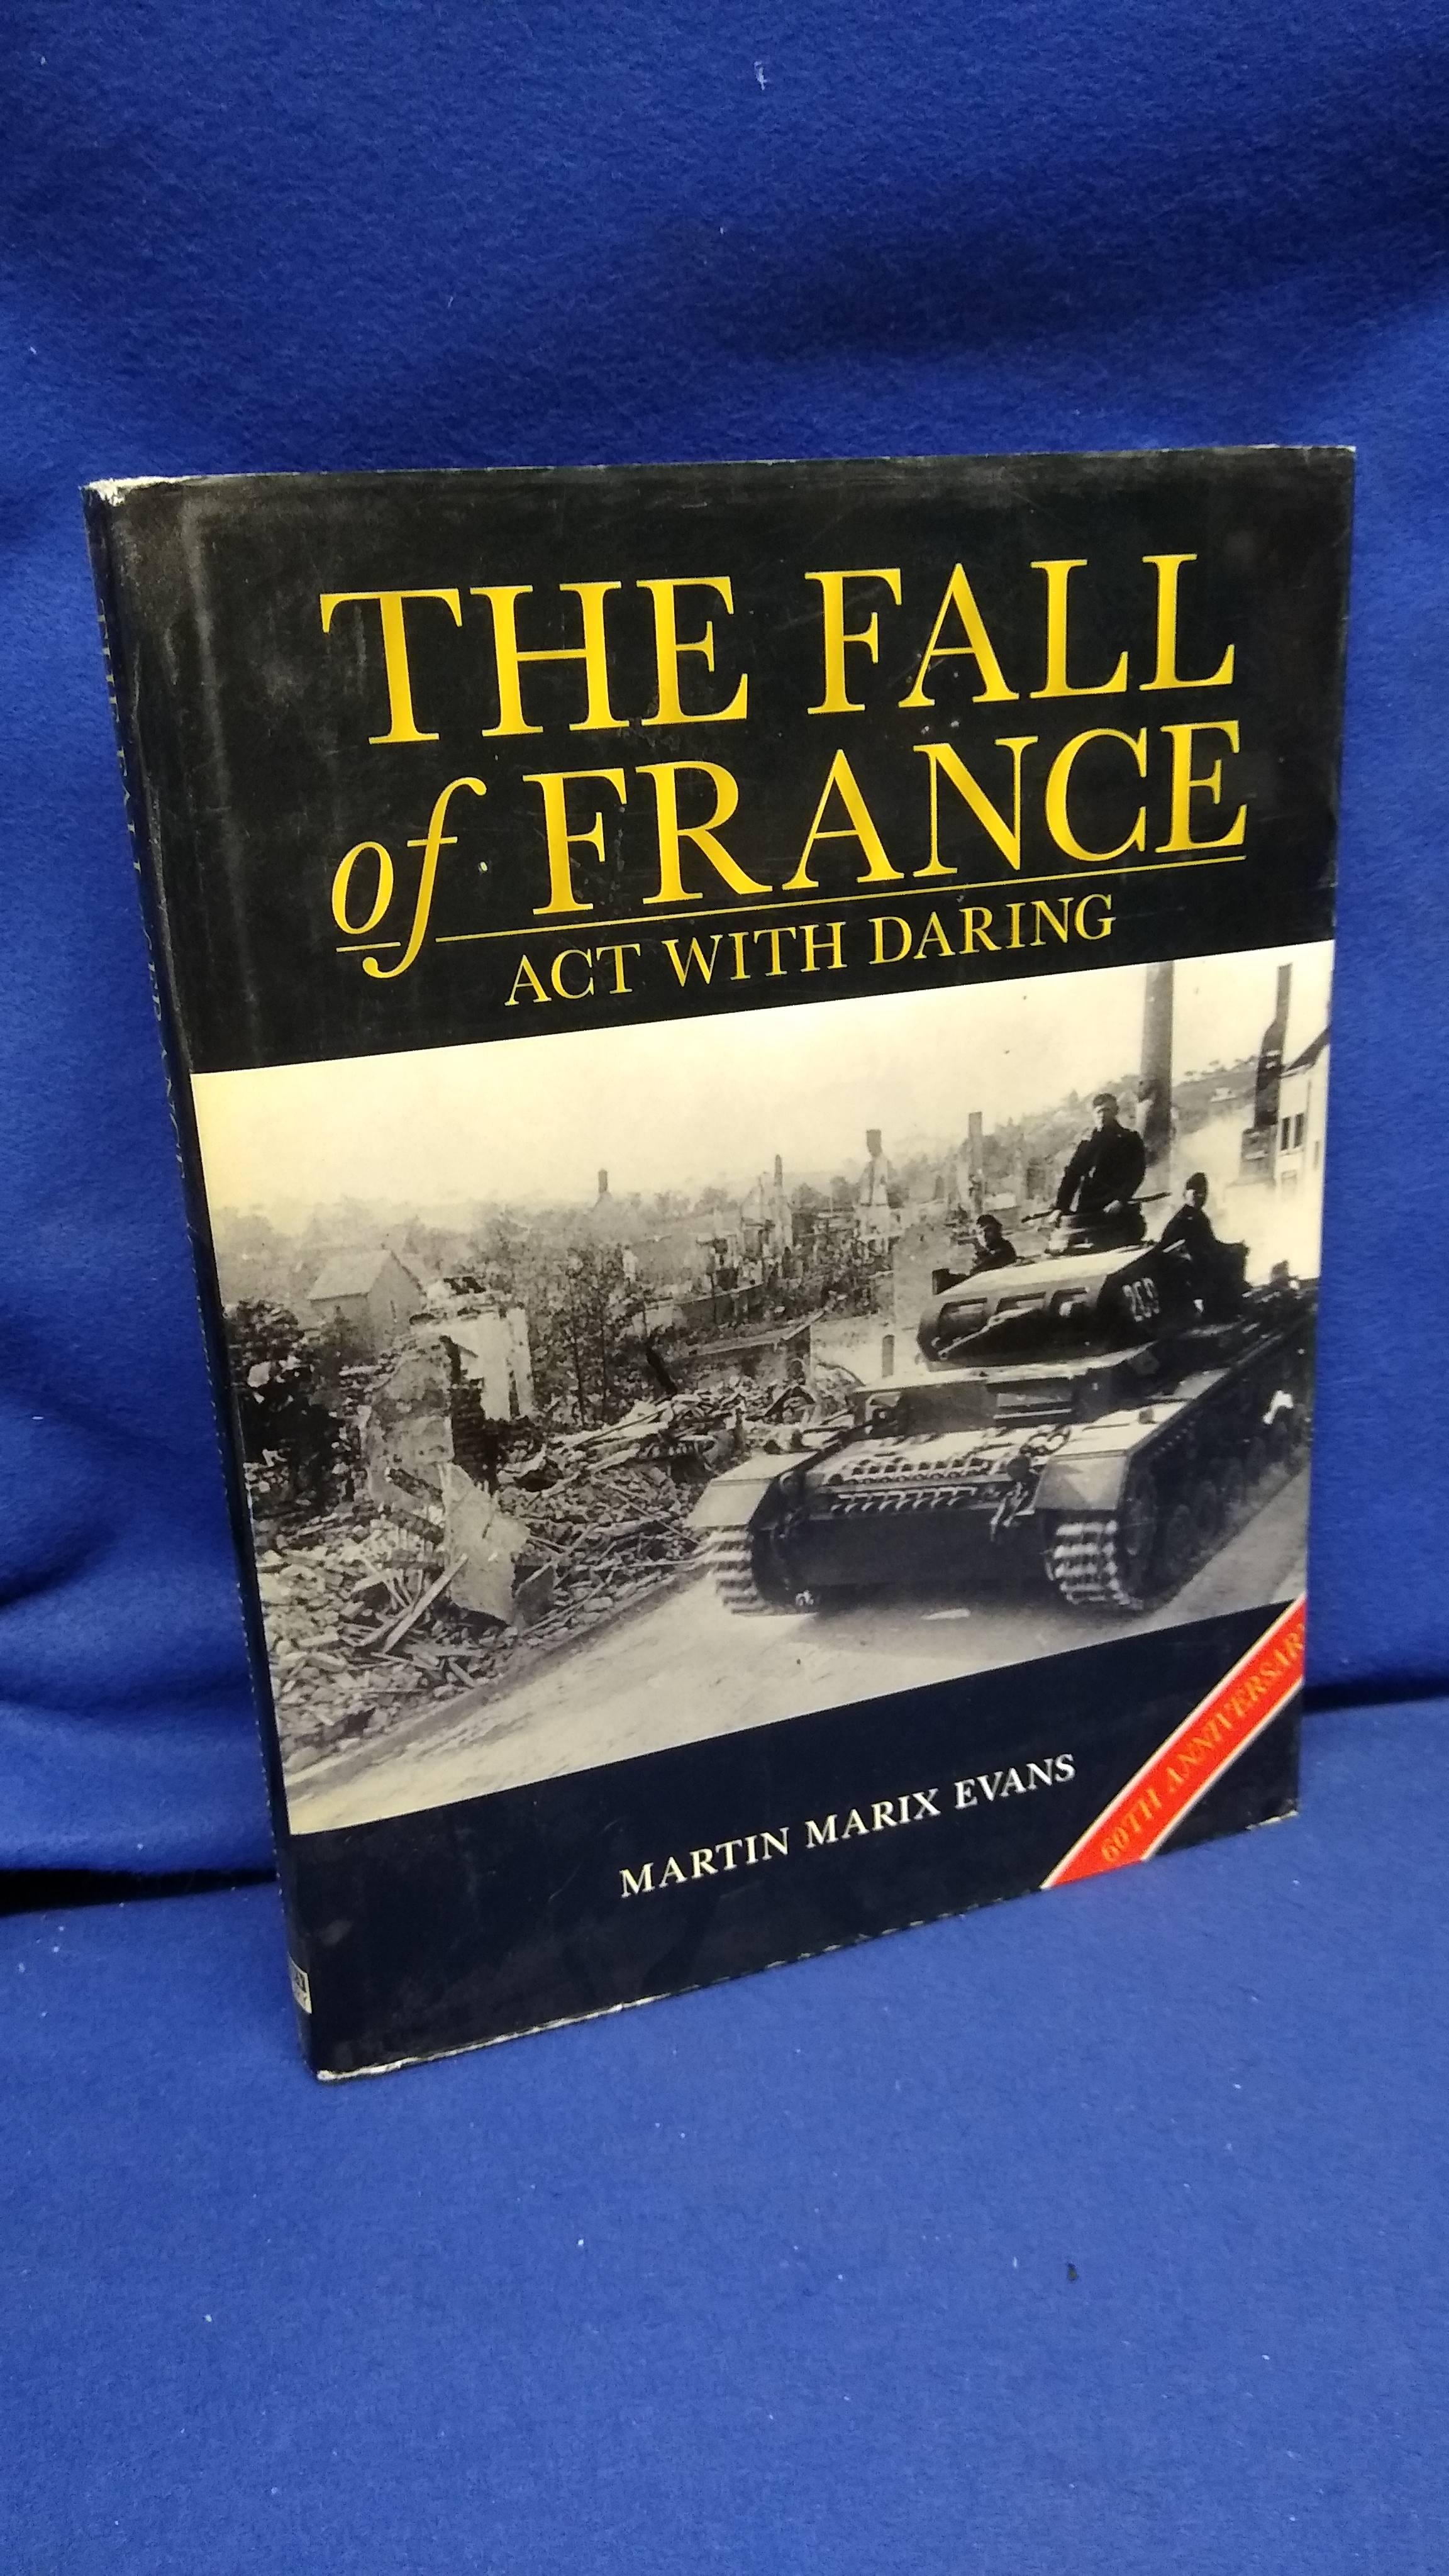 The Fall of France. Act with daring.